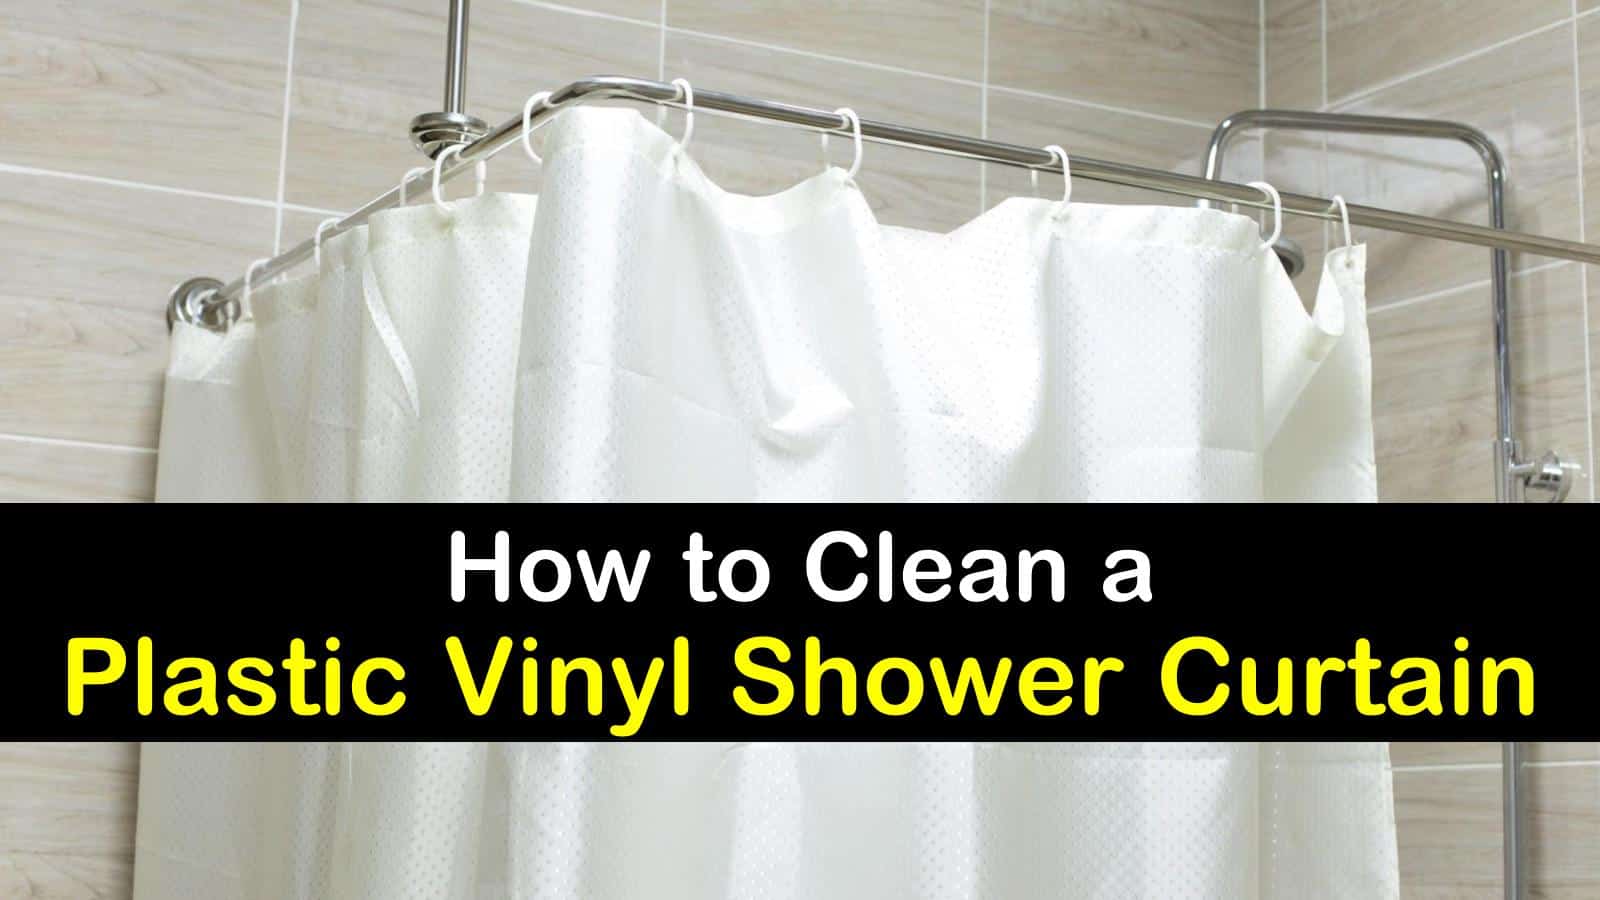 5 Excellent Ways To Clean A Shower Curtain, How To Remove Mildew From Bottom Of Shower Curtain